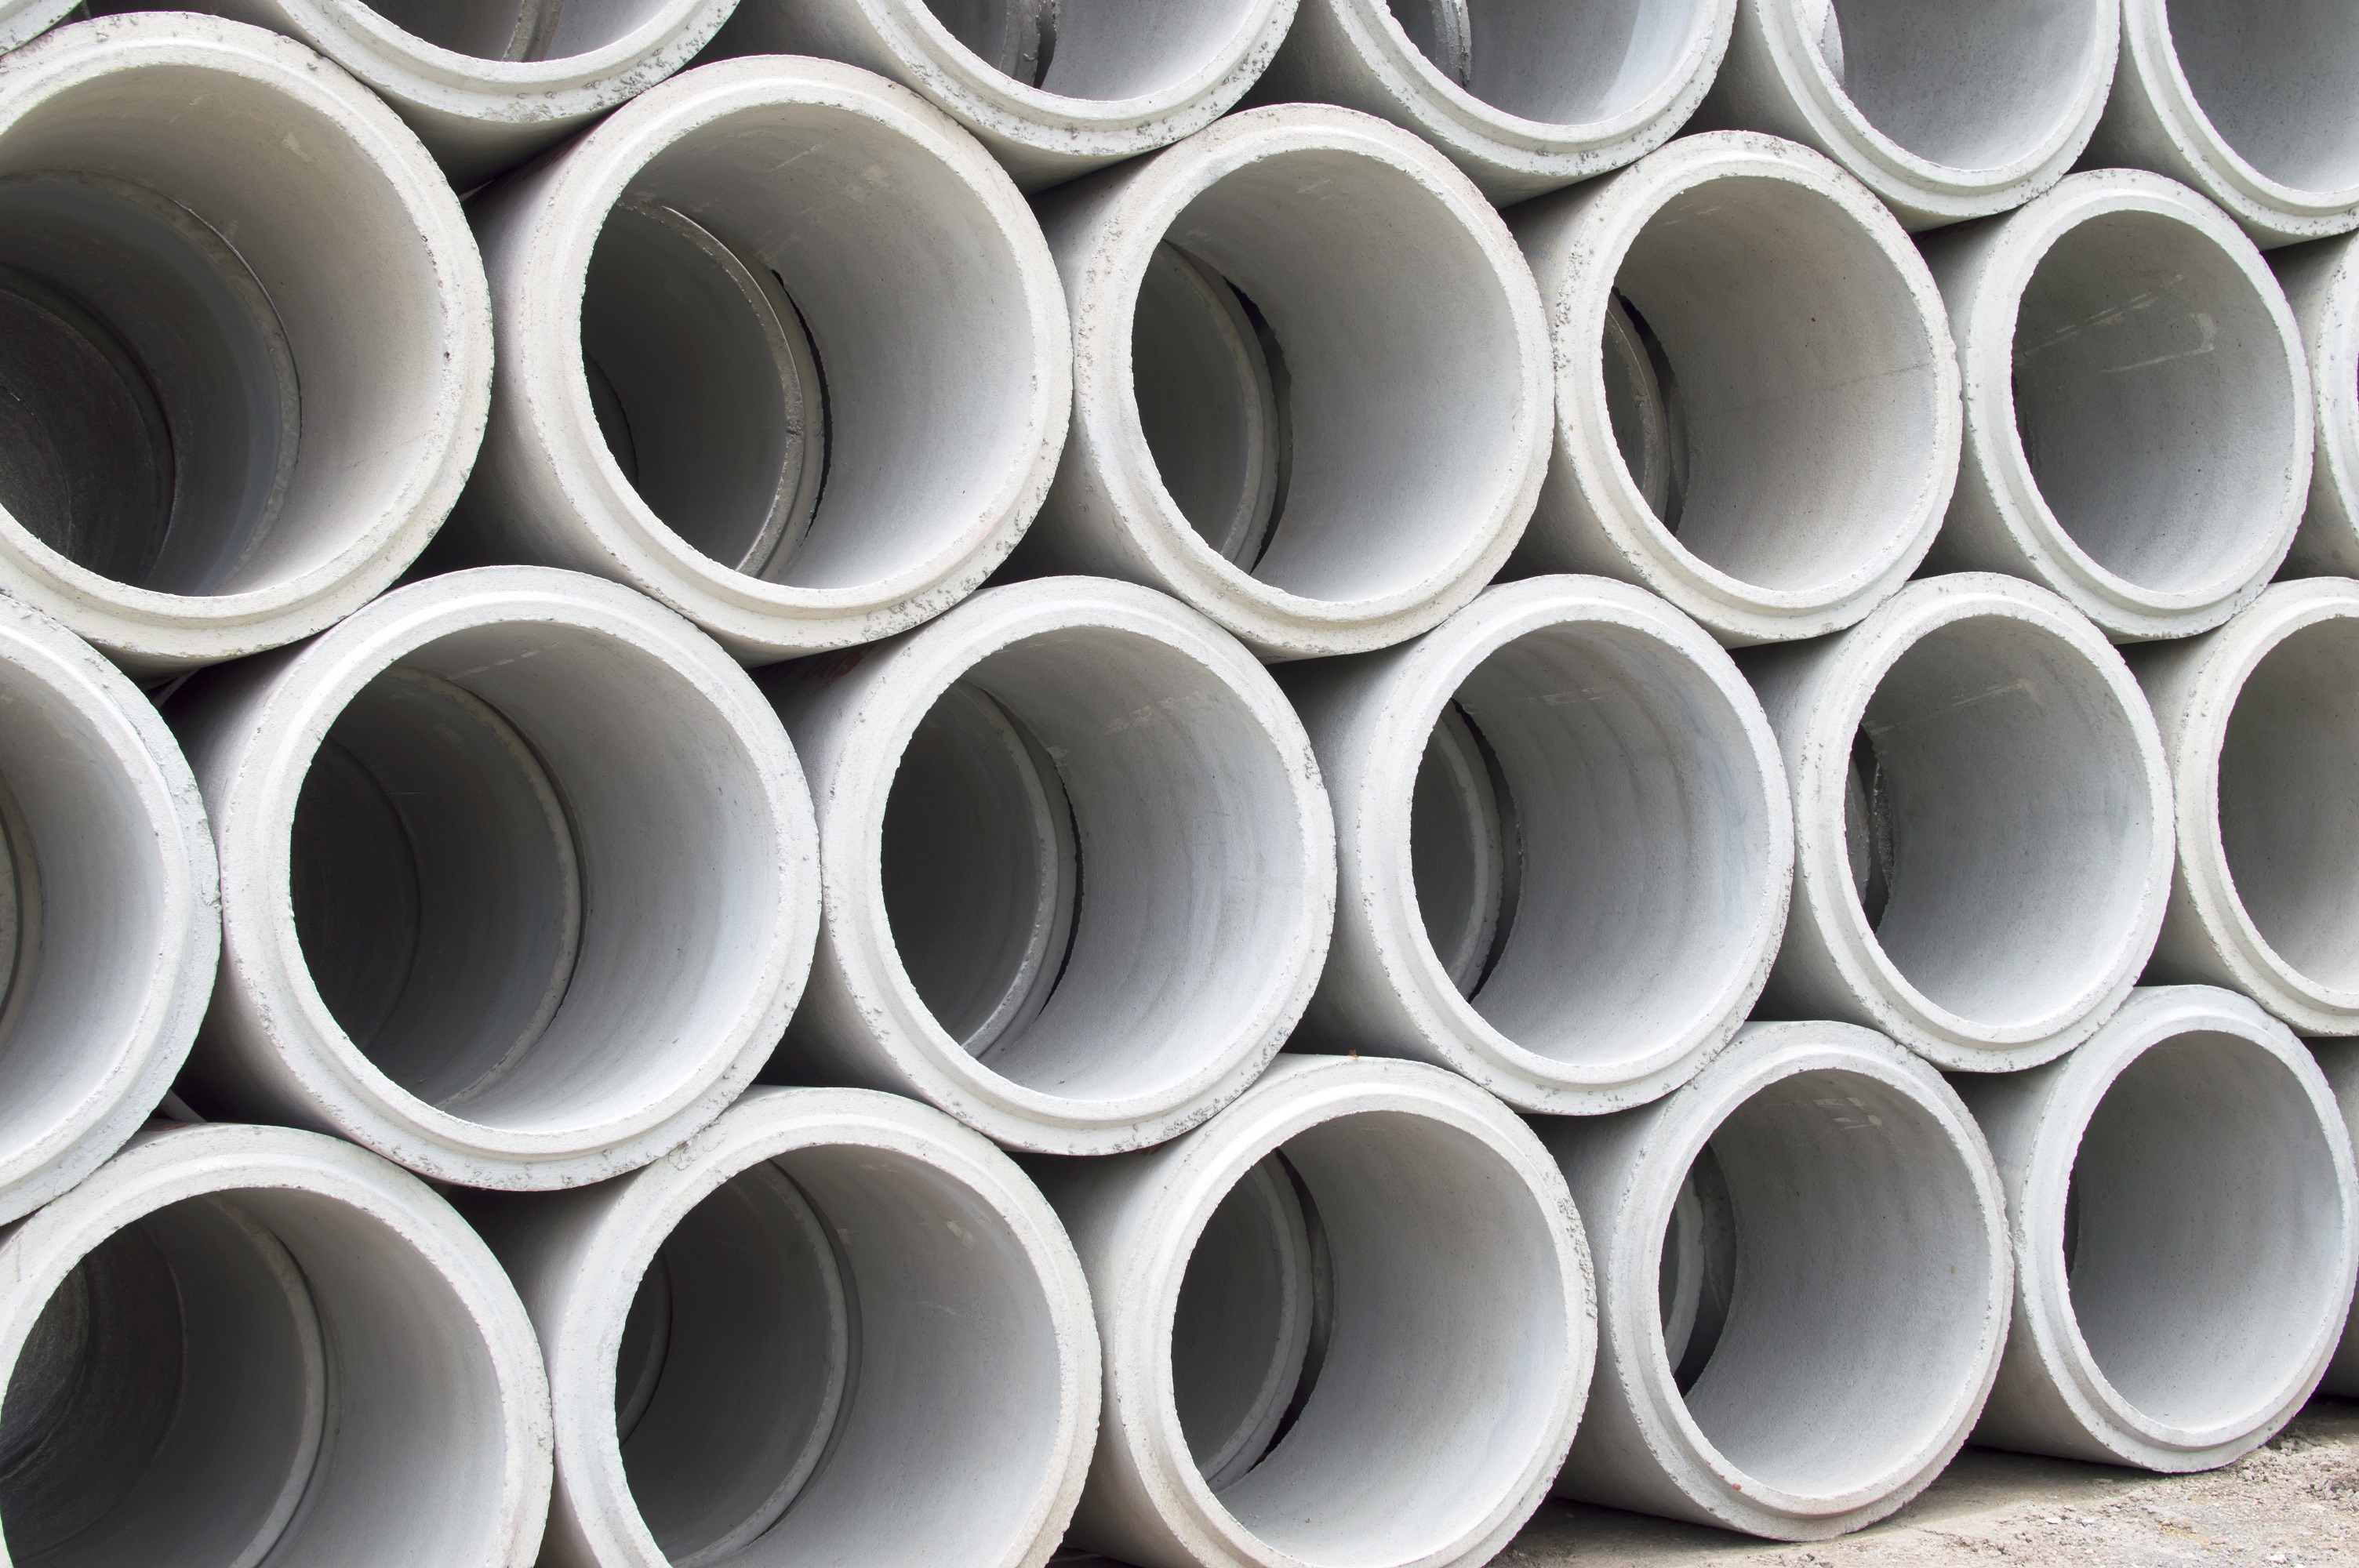 A stack of concrete pipes.